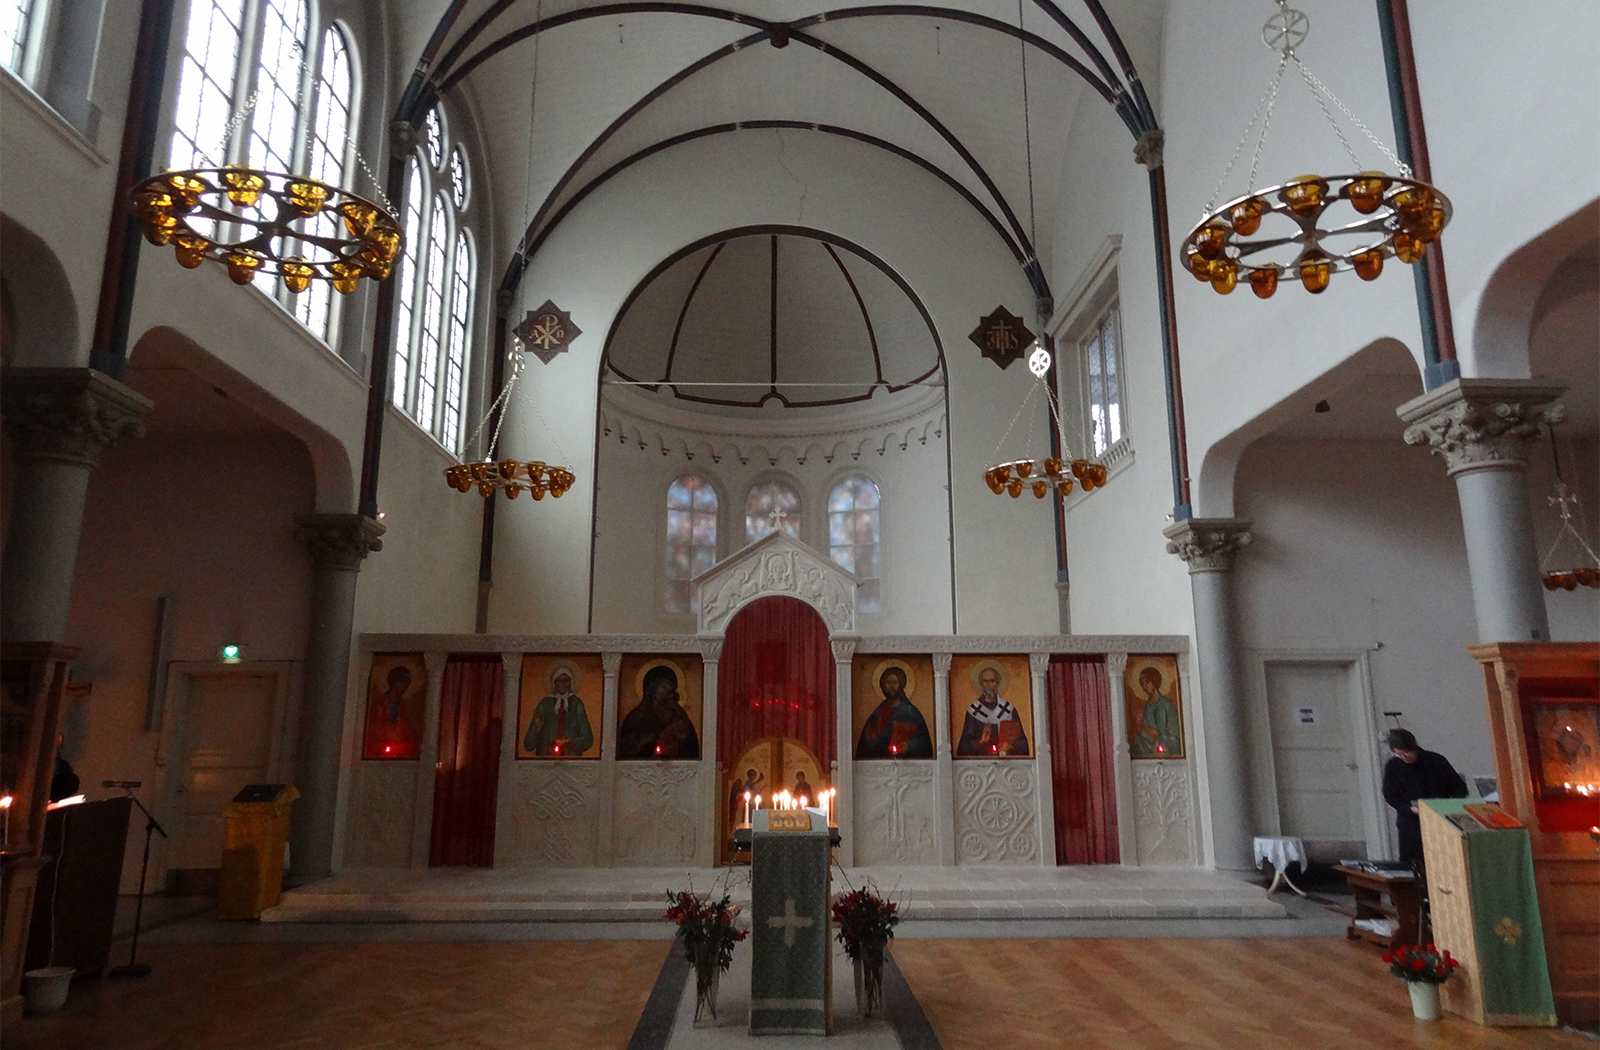 St. Nicholas of Myra Russian Orthodox Church in Amsterdam. Photo by Jim Forest/Flickr/Creative Commons